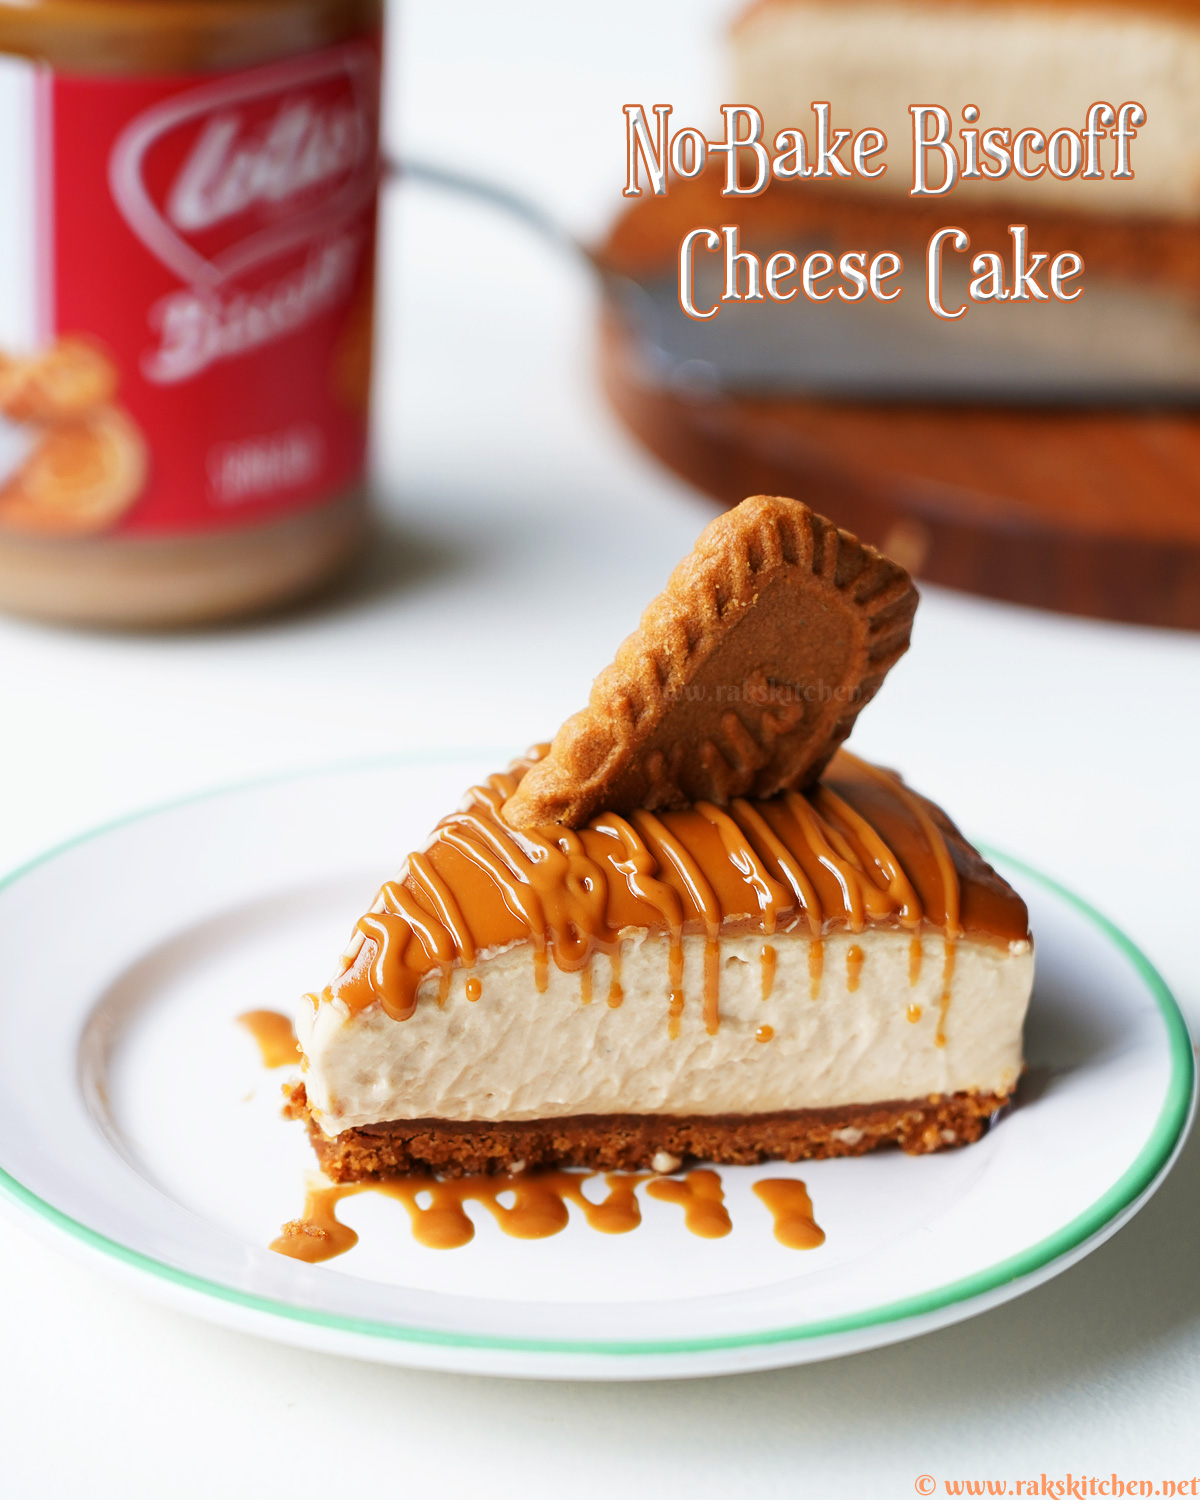 A slice of biscoff cheesecake with a drizzle, biscuit on top